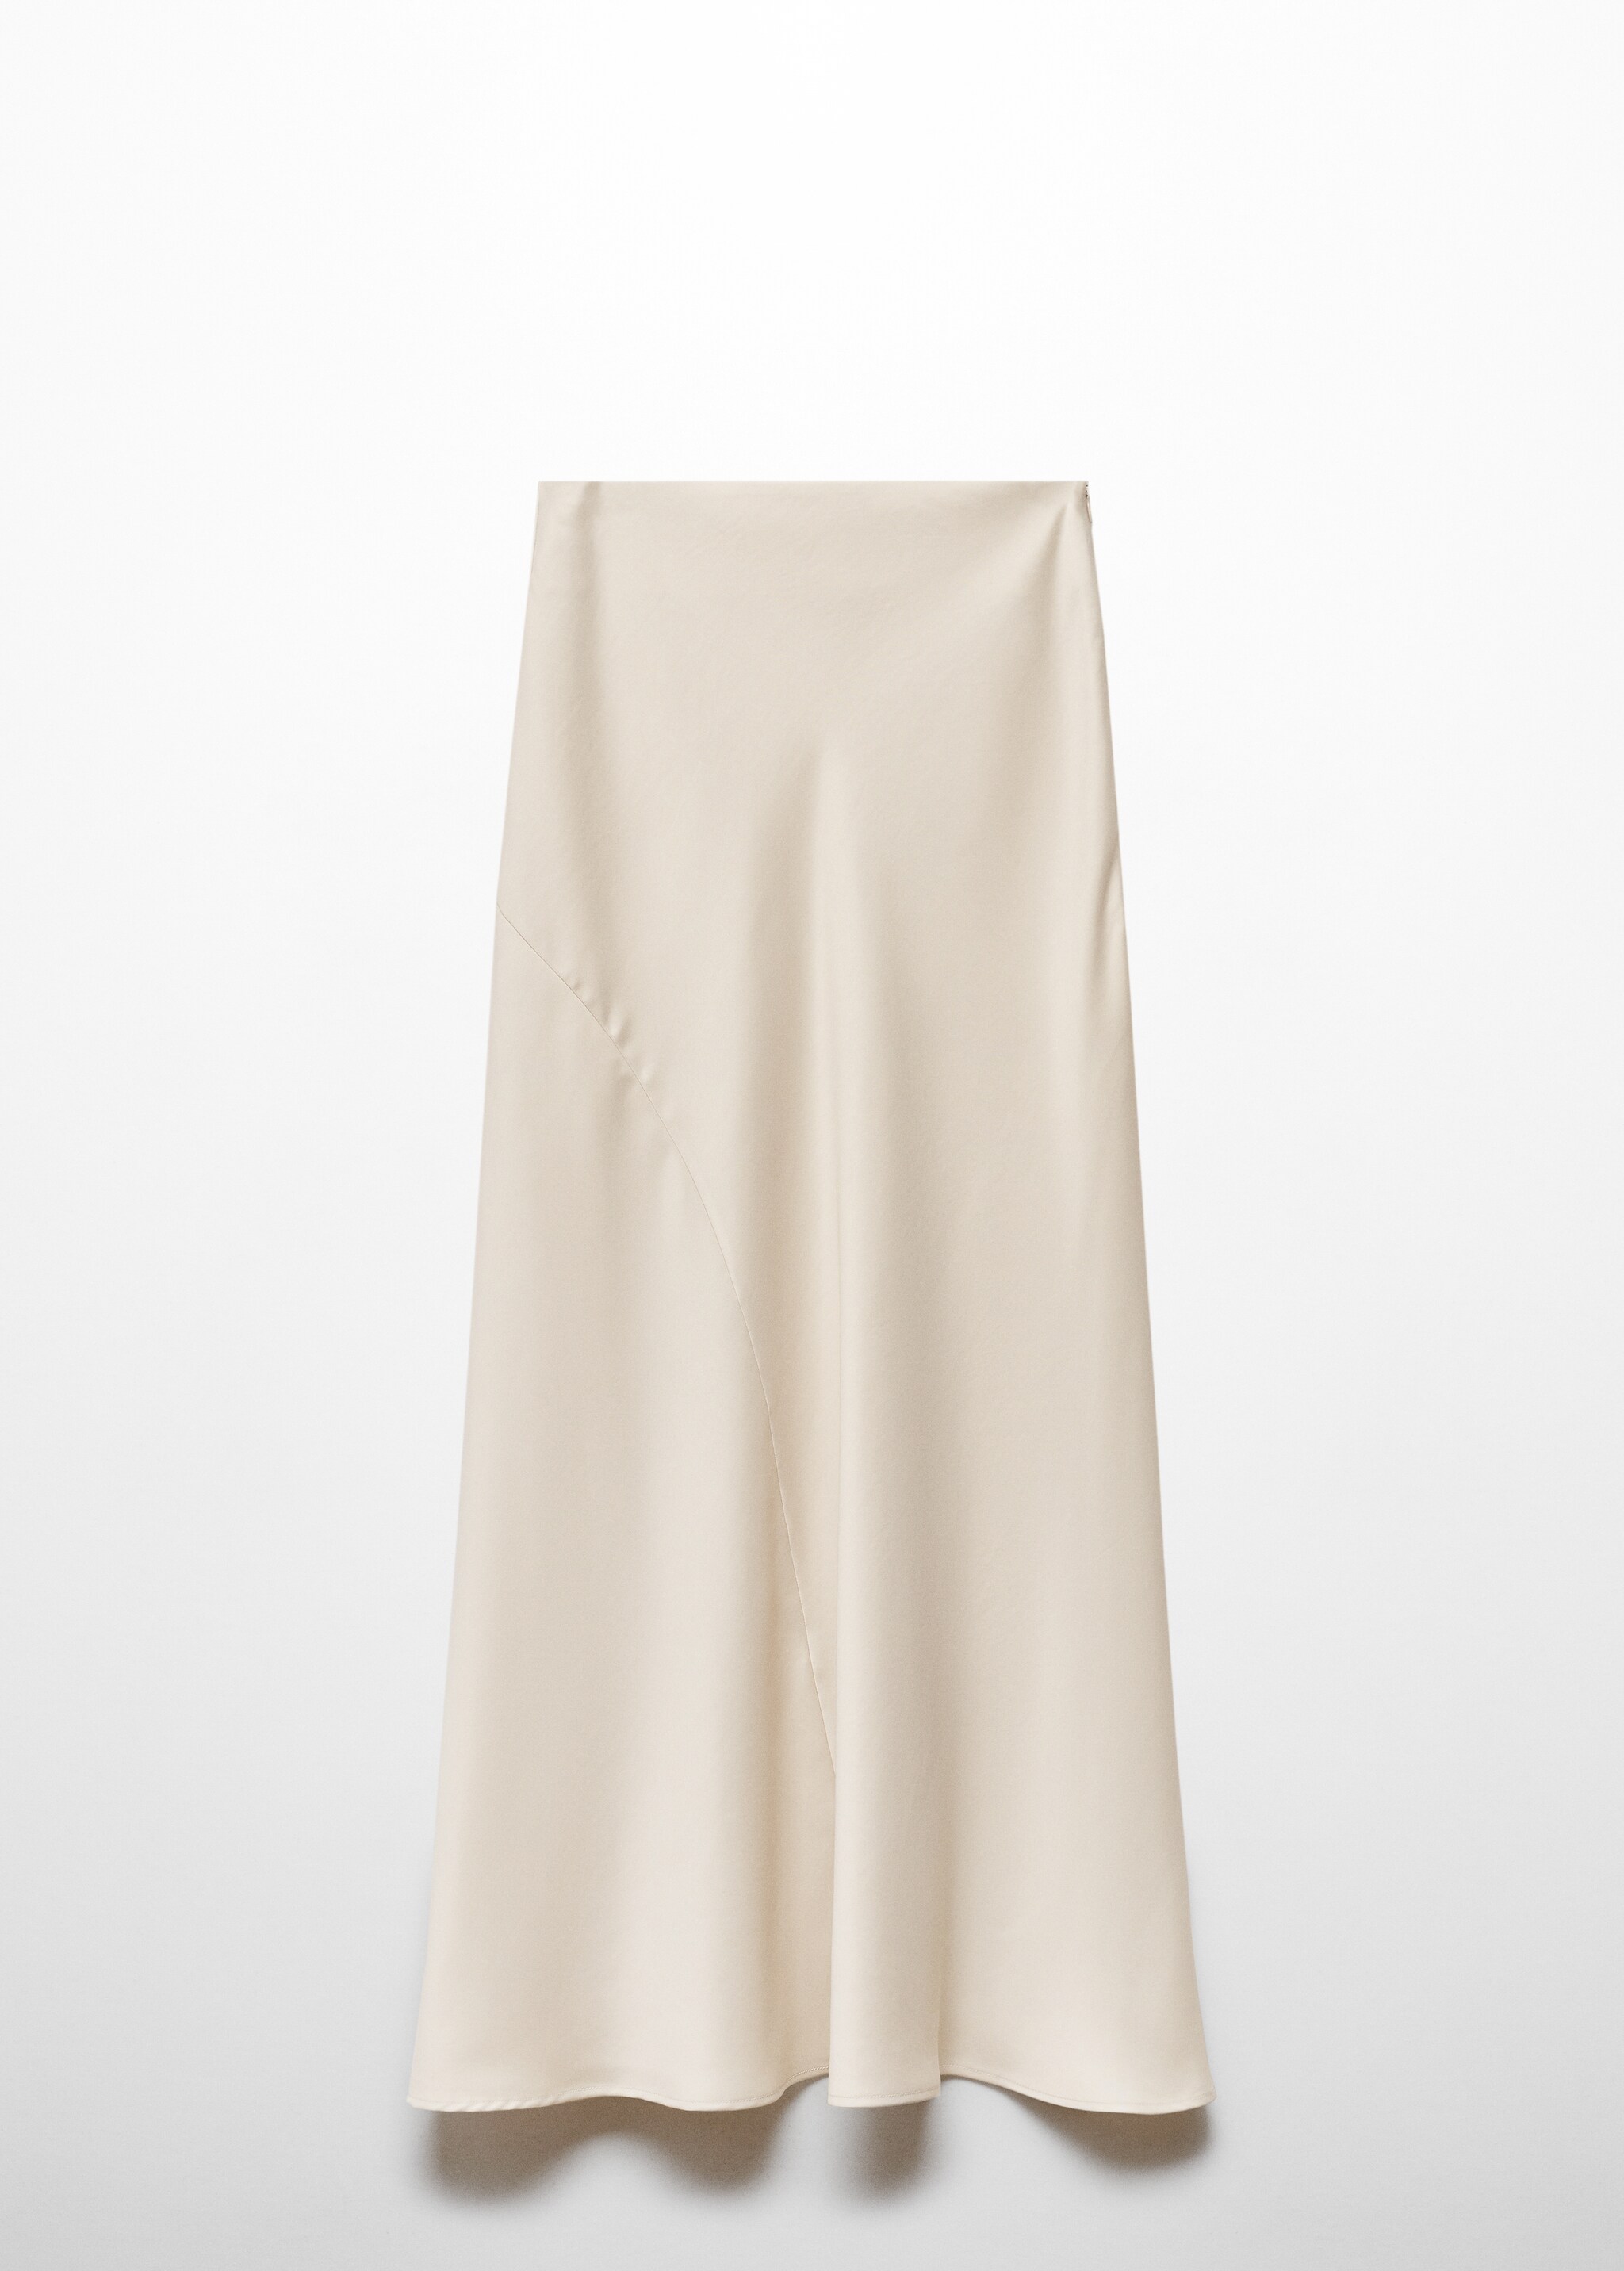 Satin long skirt - Article without model